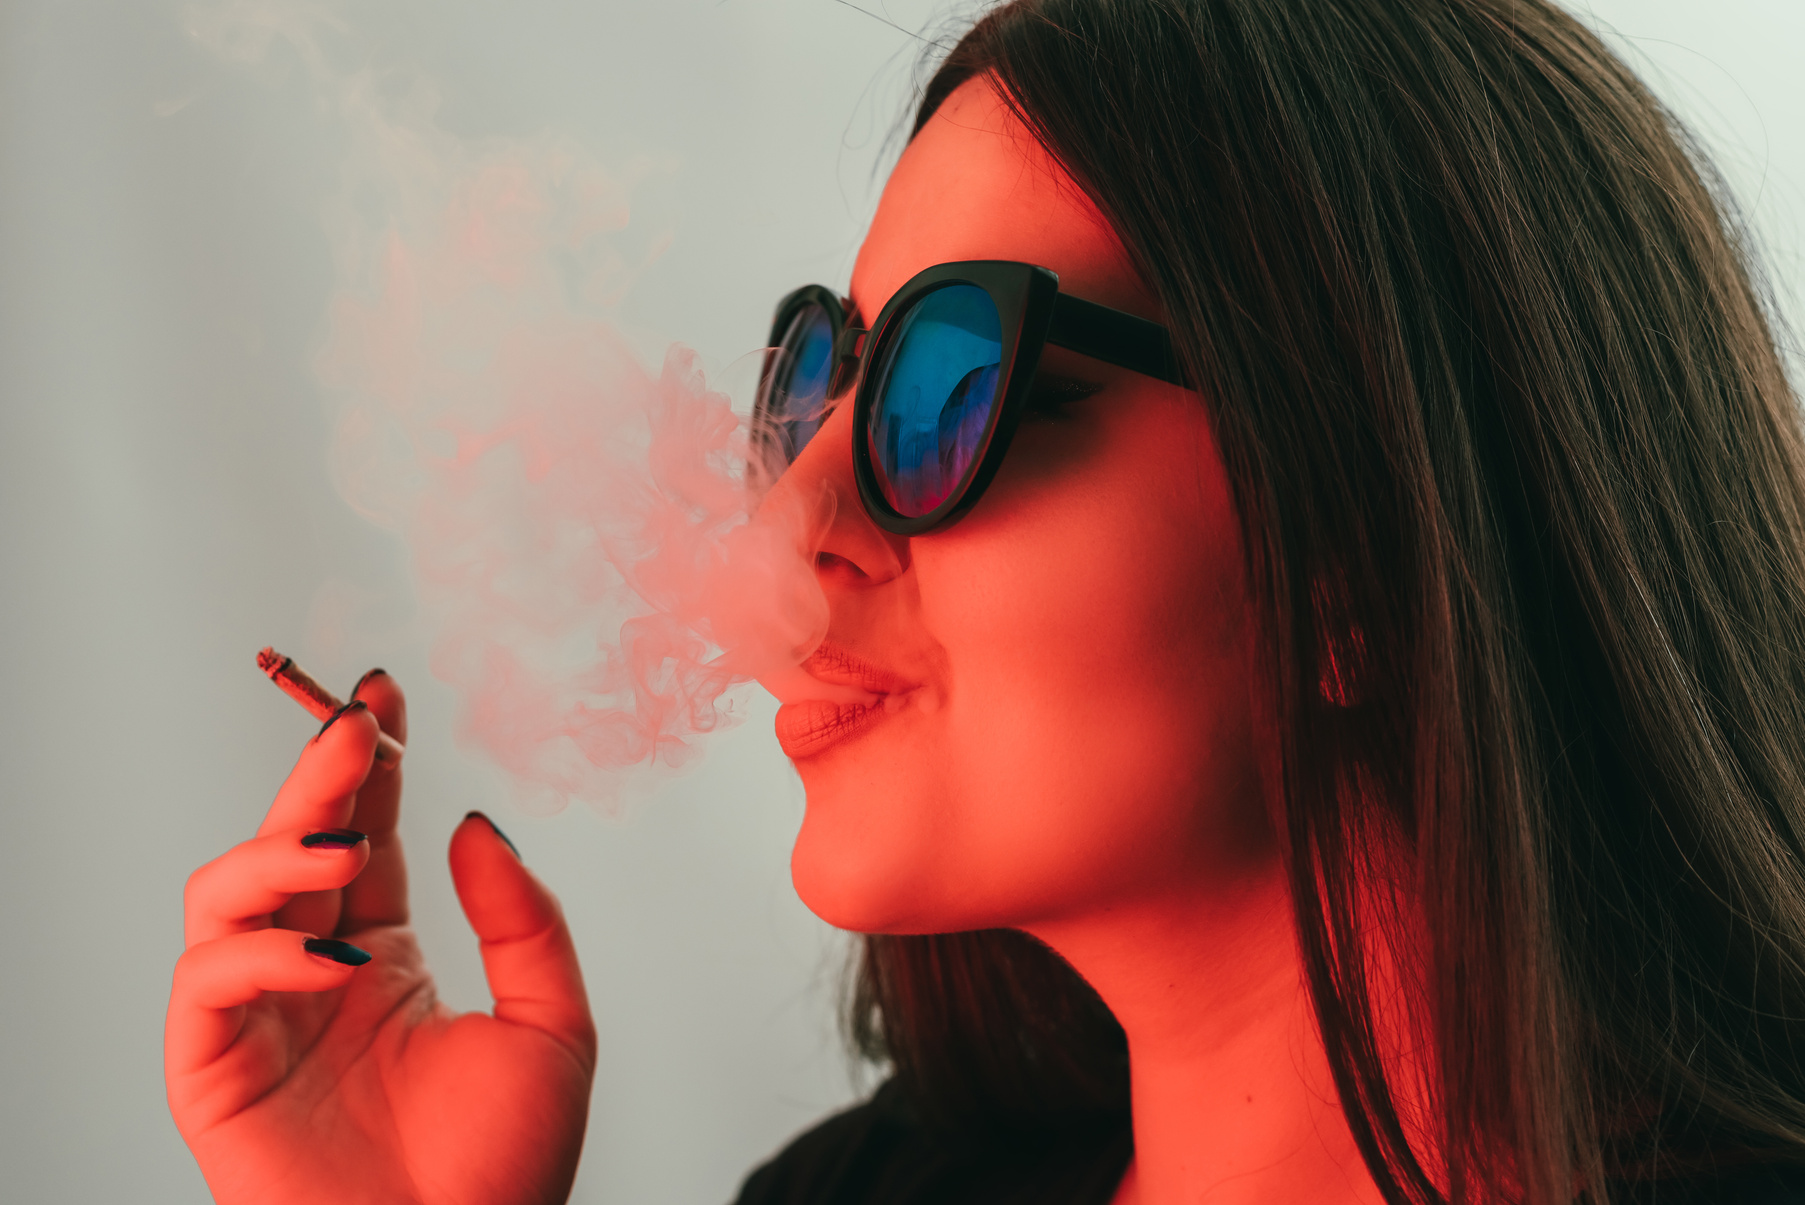 Young woman smoking weed, multicolored portrait